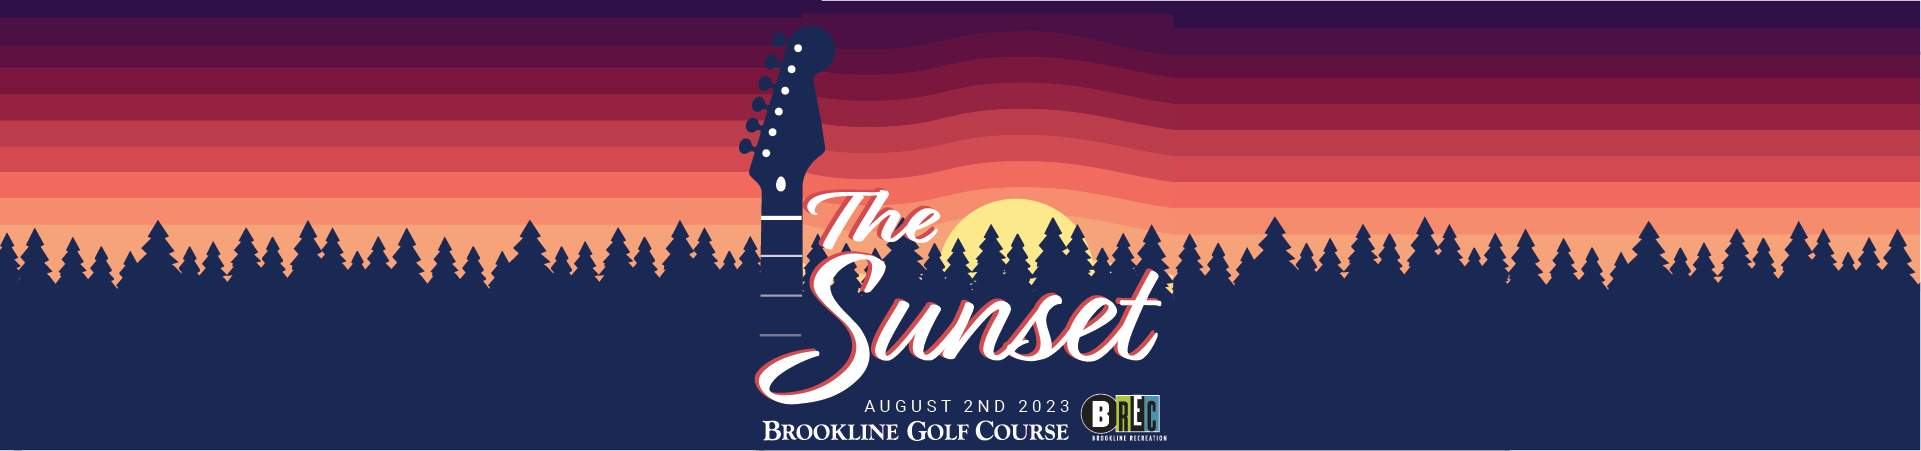 The Sunset: A family-friendly outdoor concert experience!